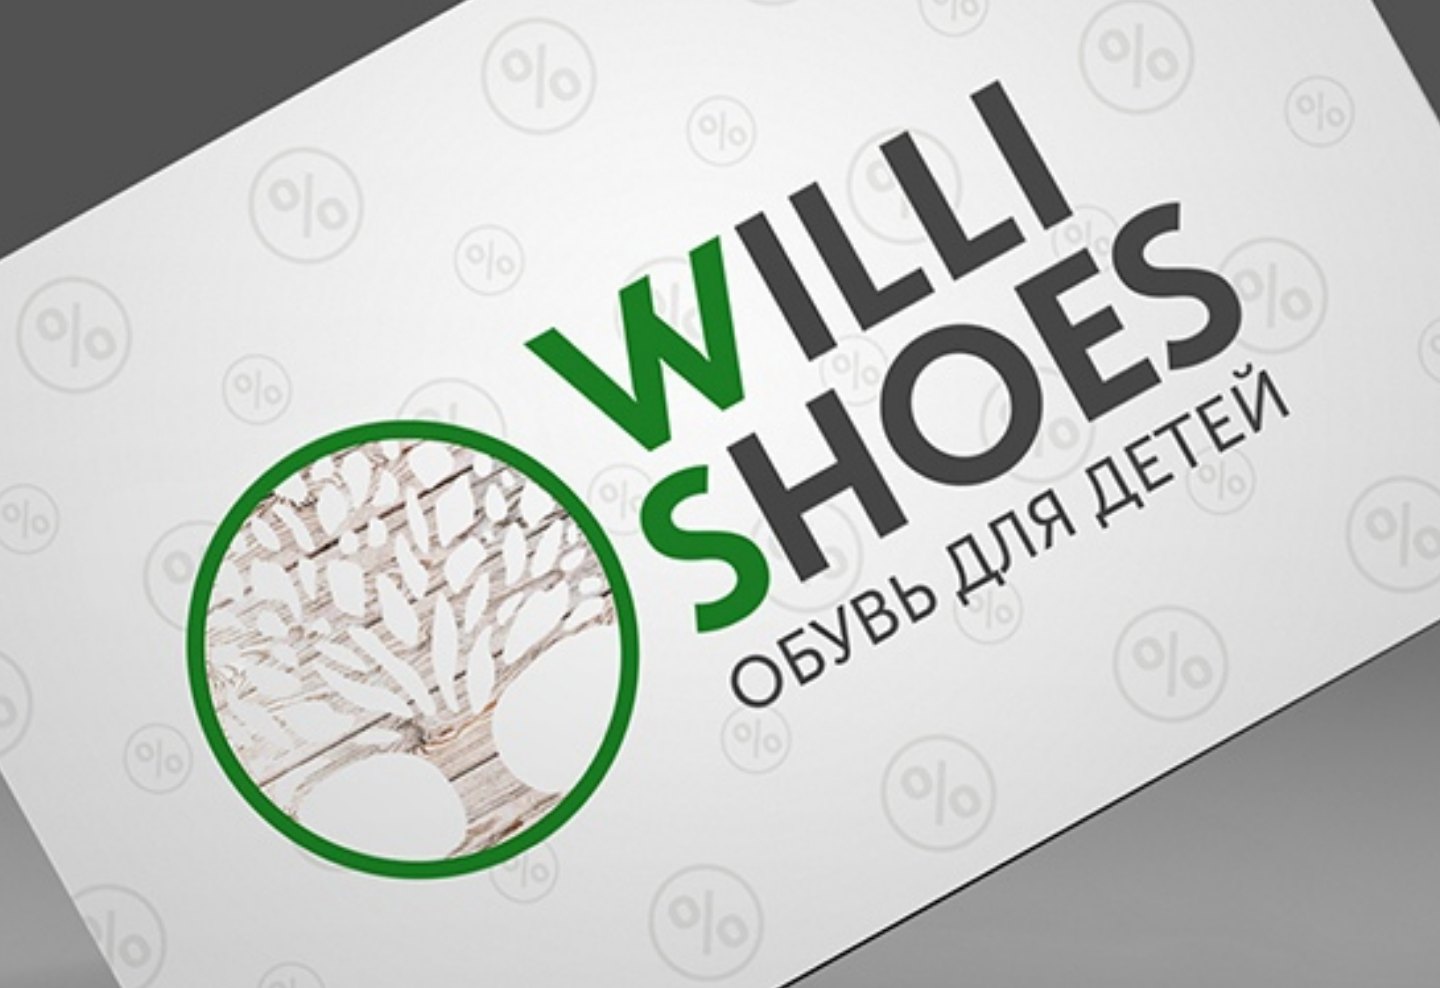 Willi shoes